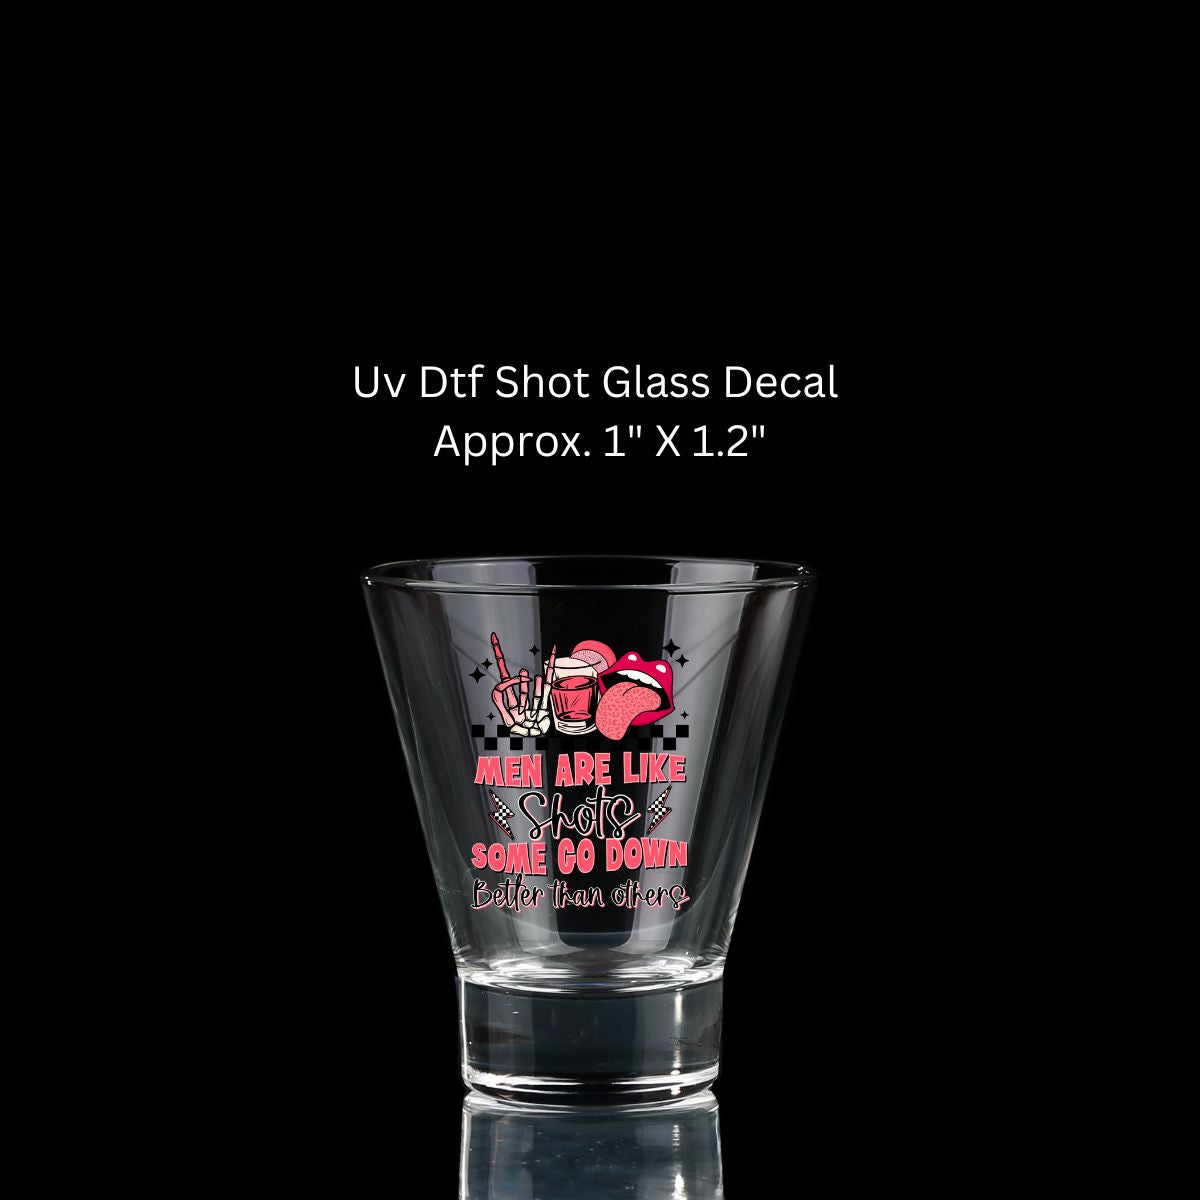 Uv Dtf Shot Glass Decals Set of 3 Men Are Like Shots Some Go Down Better Than Others